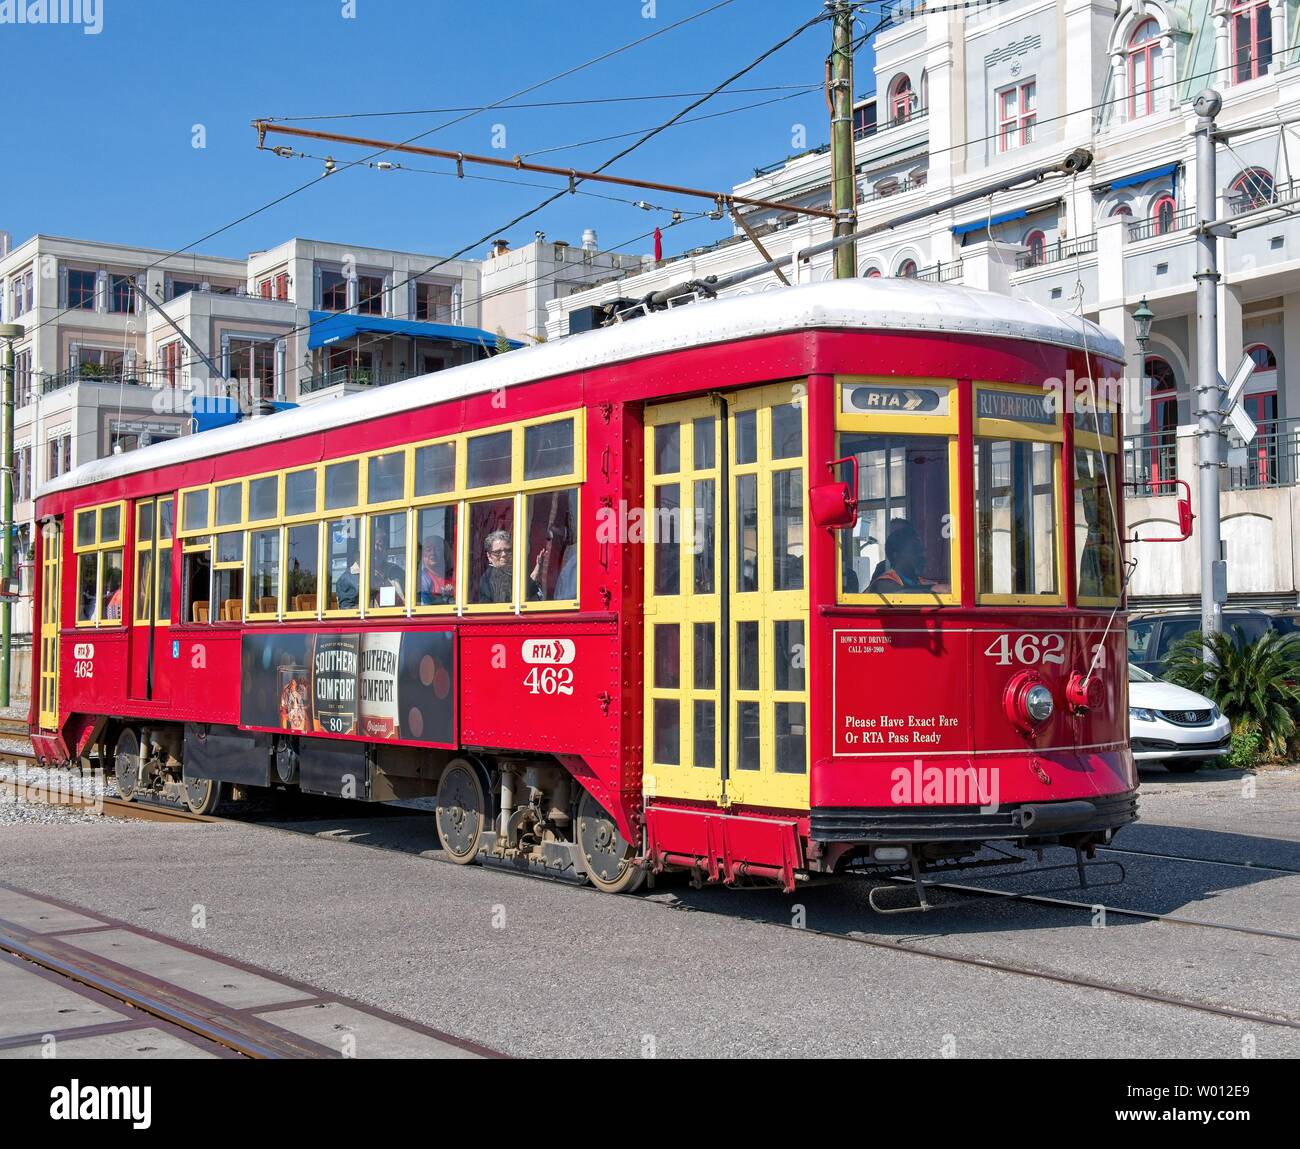 A red street car with yellow doors on the streets of New Orleans Stock Photo